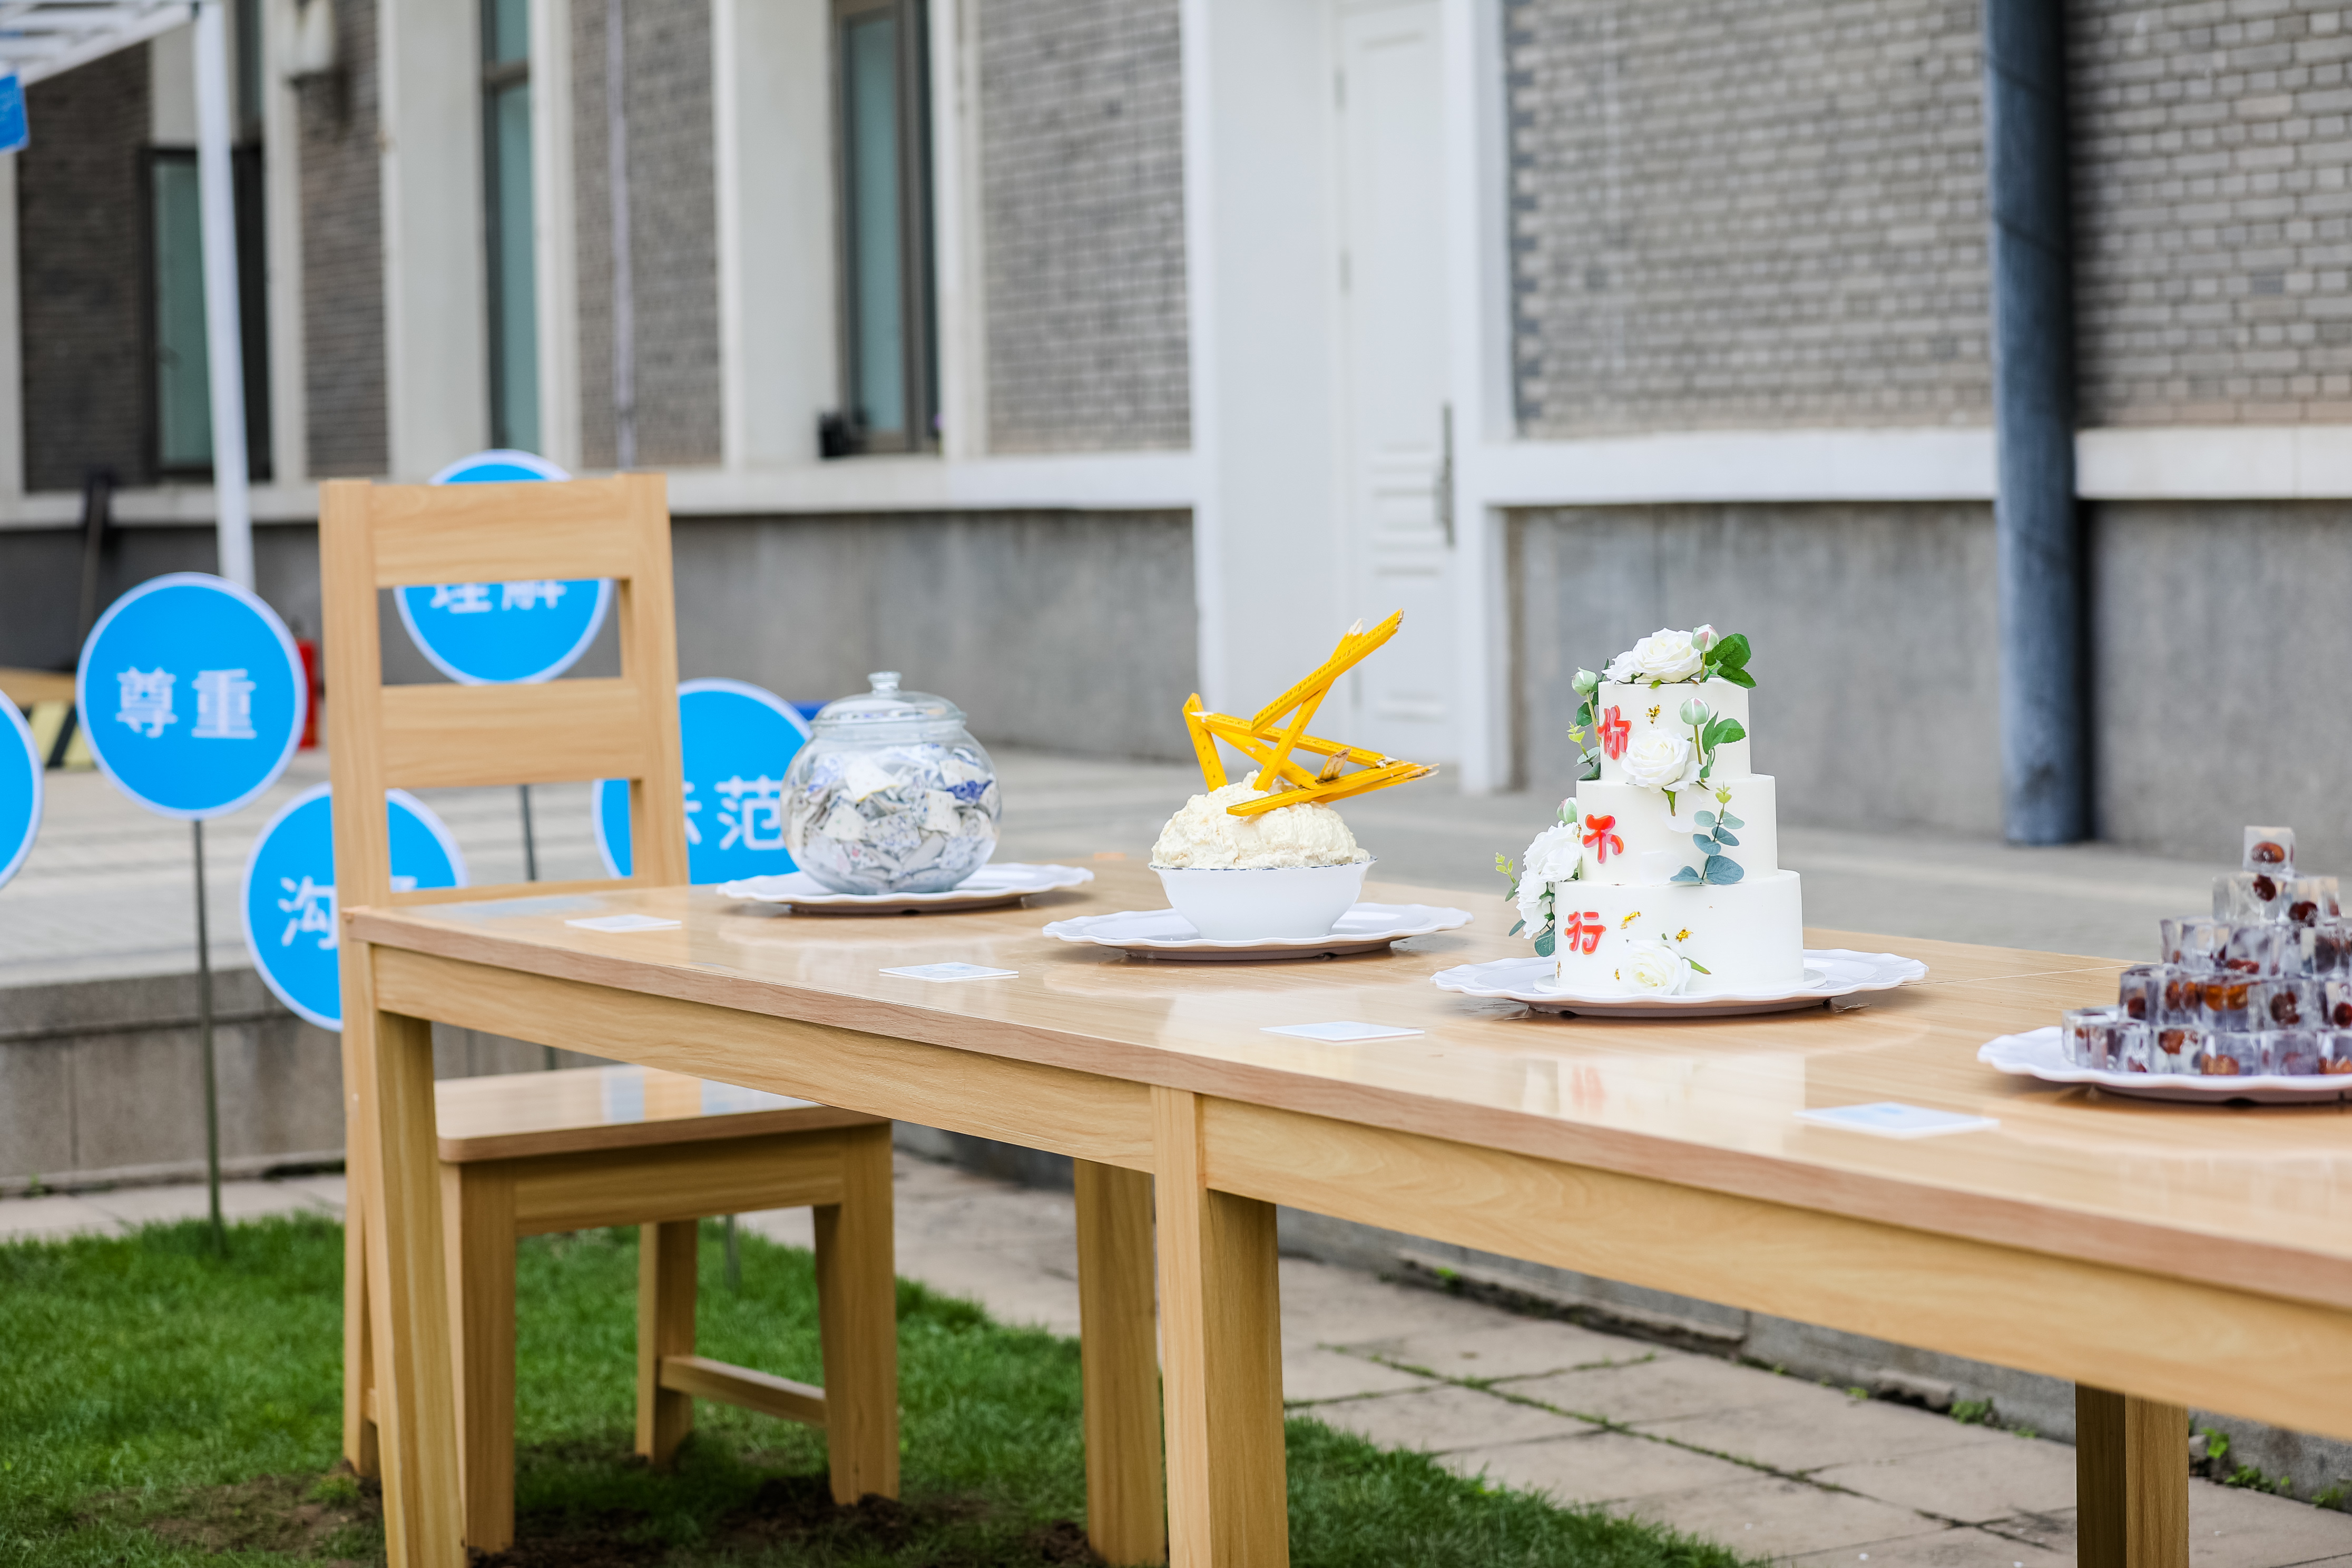 An art installation portraying children's experiences in the home setting is on display at the China National Children's Center in Beijing on May 31, 2023. The dishes displayed on the dining table represent opposition to parents disciplining and criticizing their children during mealtimes and advocate for positive parenting. /UNICEF